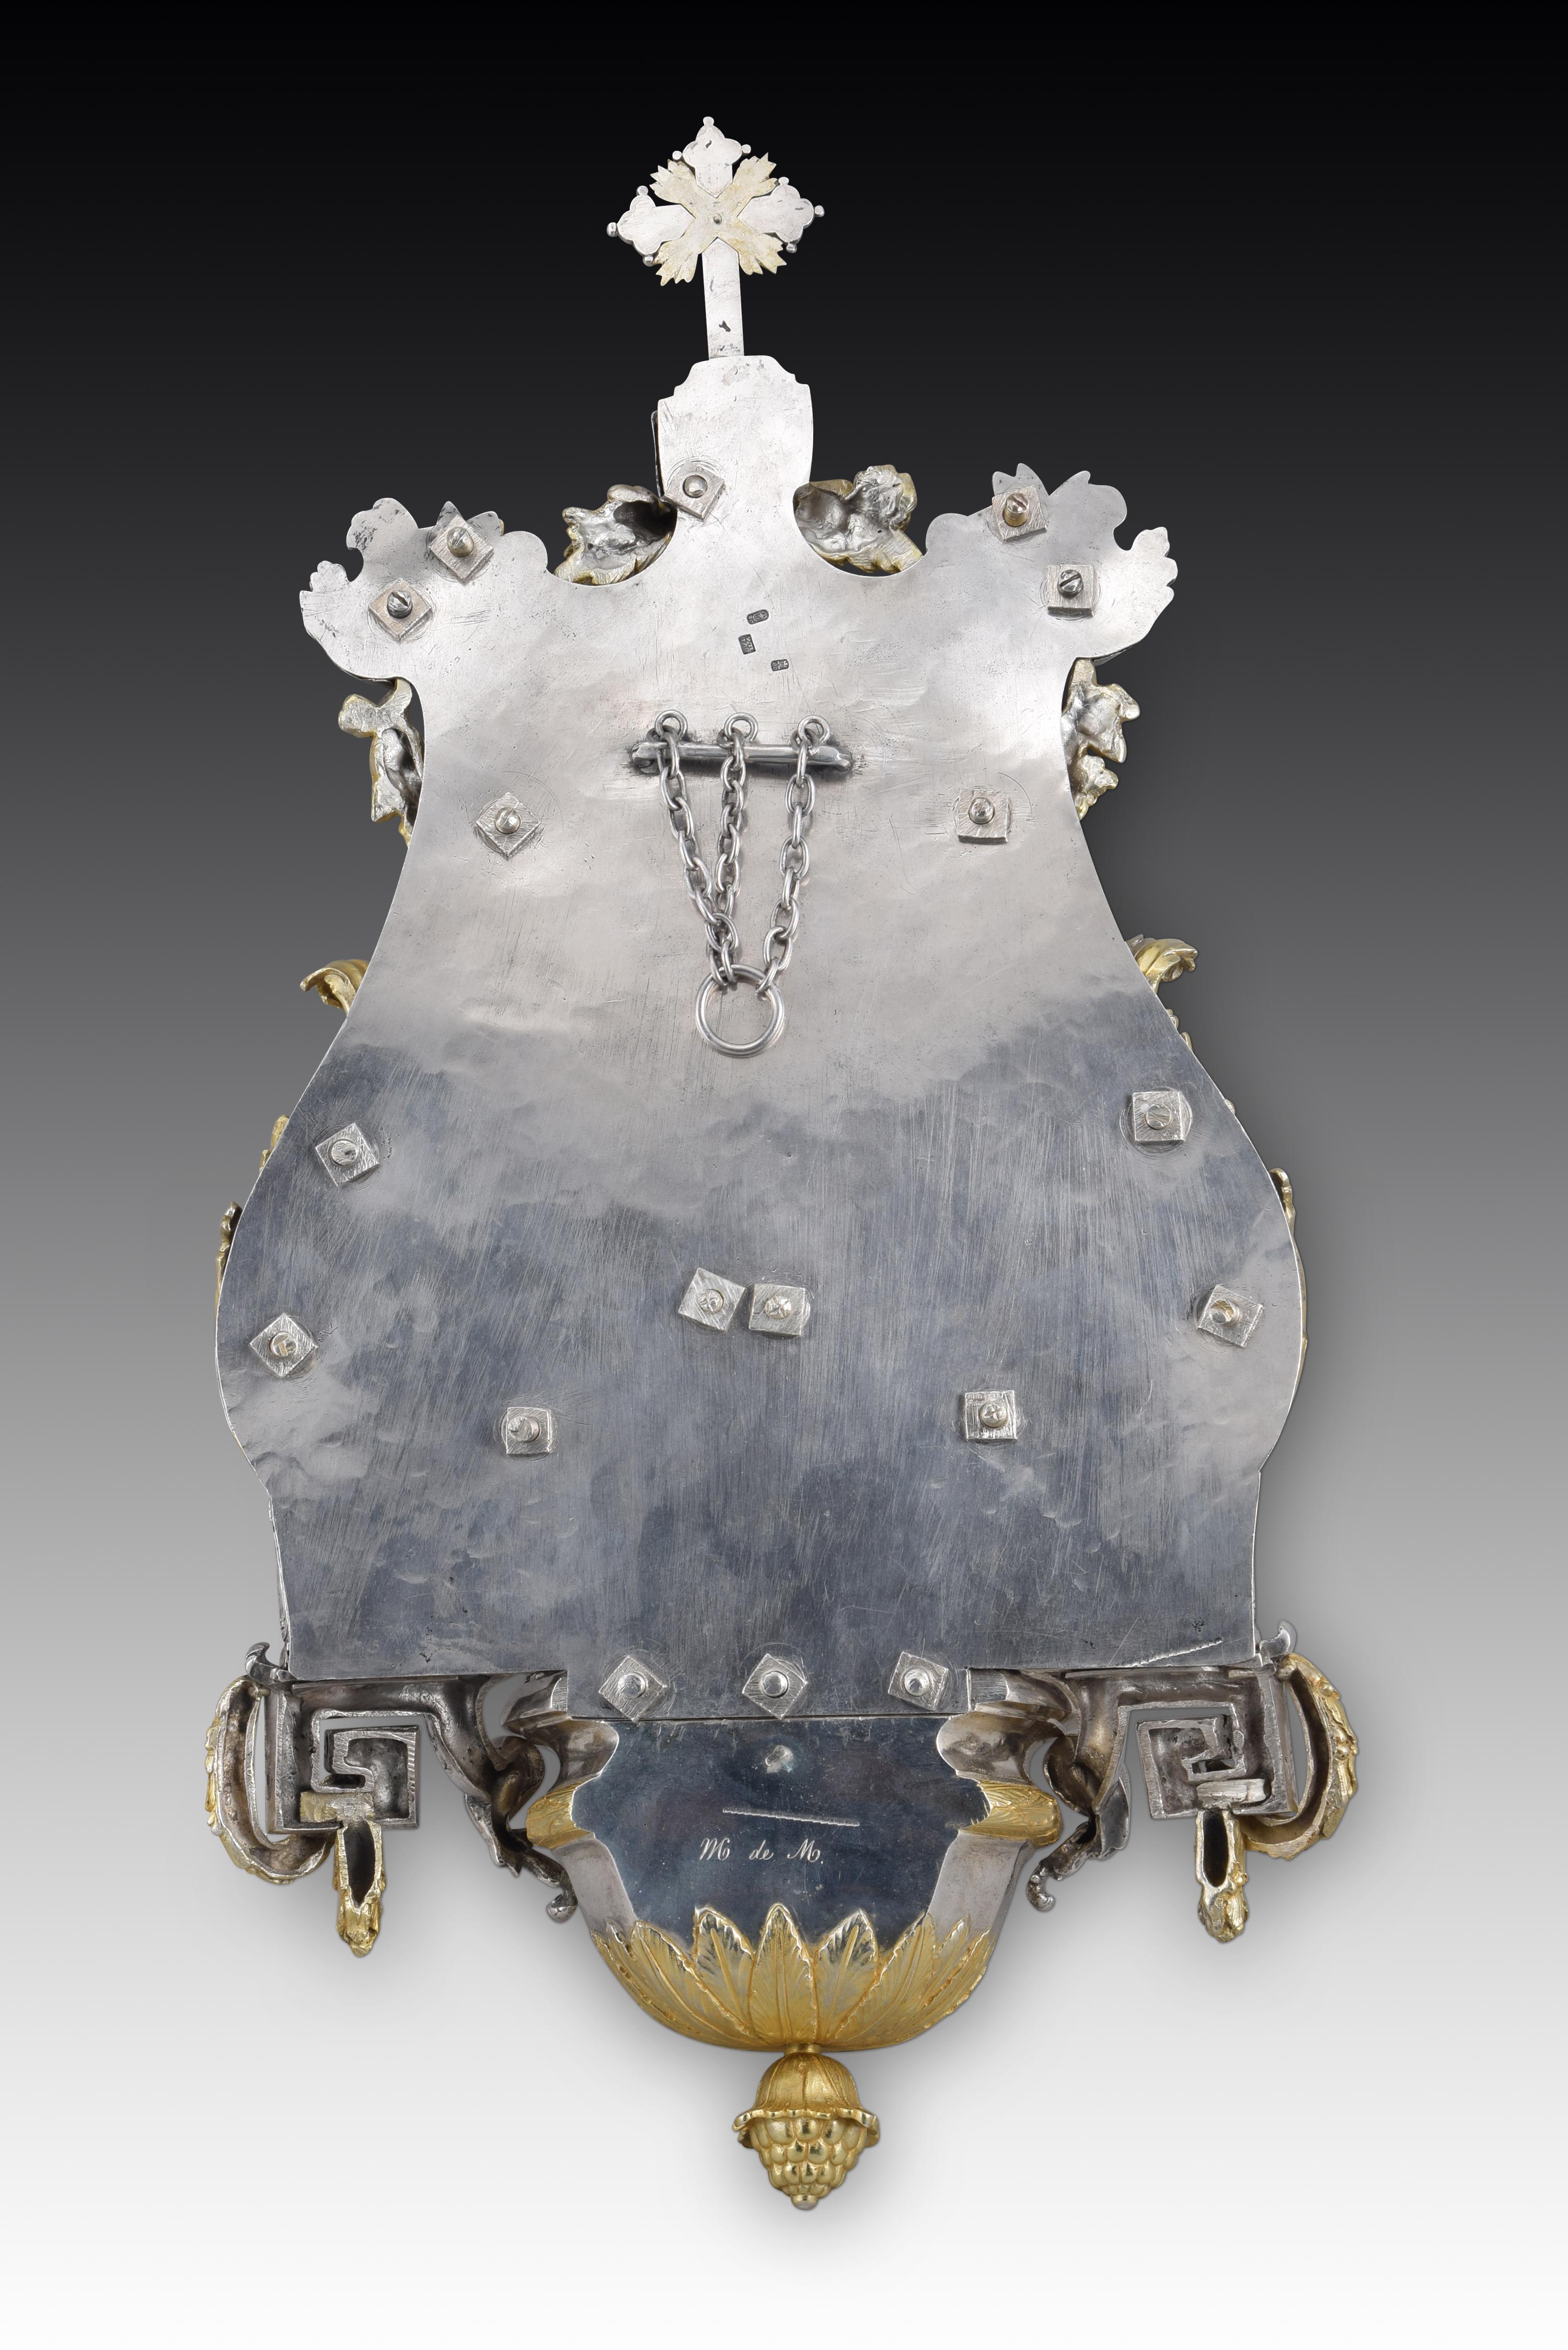 Silver Holy Water font or stoup. GUILLA. Madrid, 1780. 9